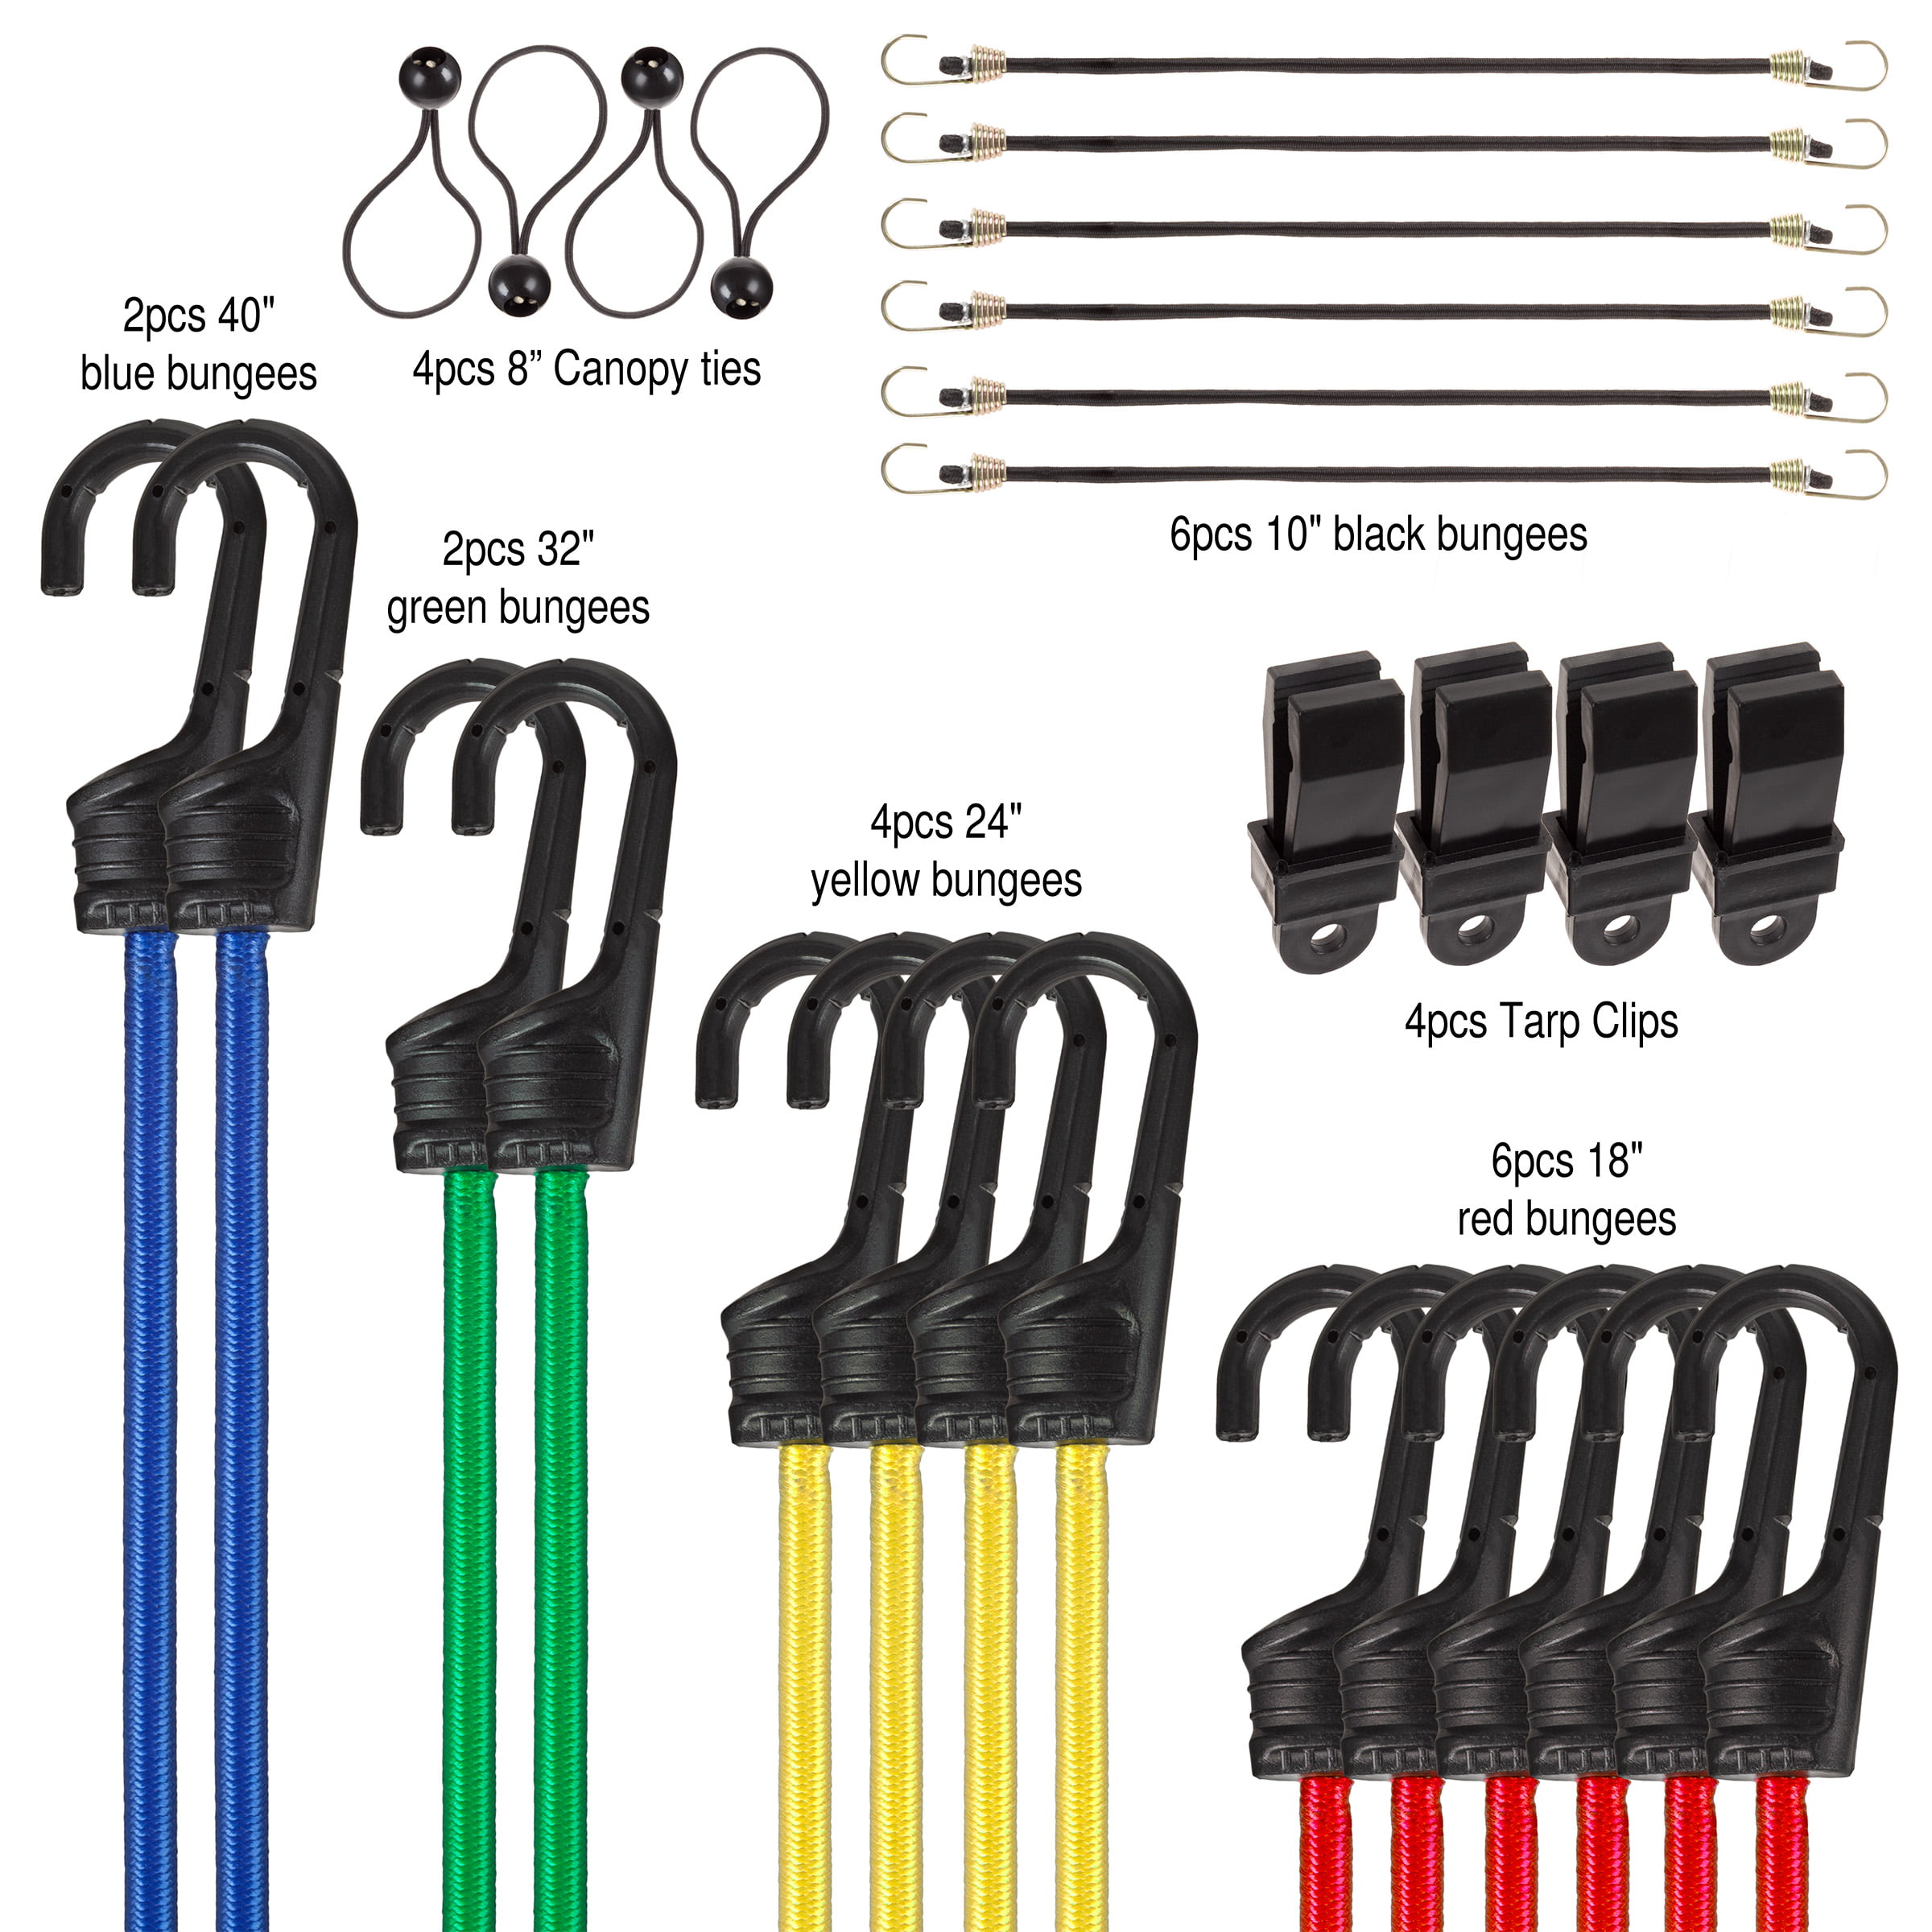 RHINO USA Bungee Cords with Hooks - Heavy Duty Outdoor 28pc Assortment with  4 Free Tarp Clips, Drawstring Organizer Bag…